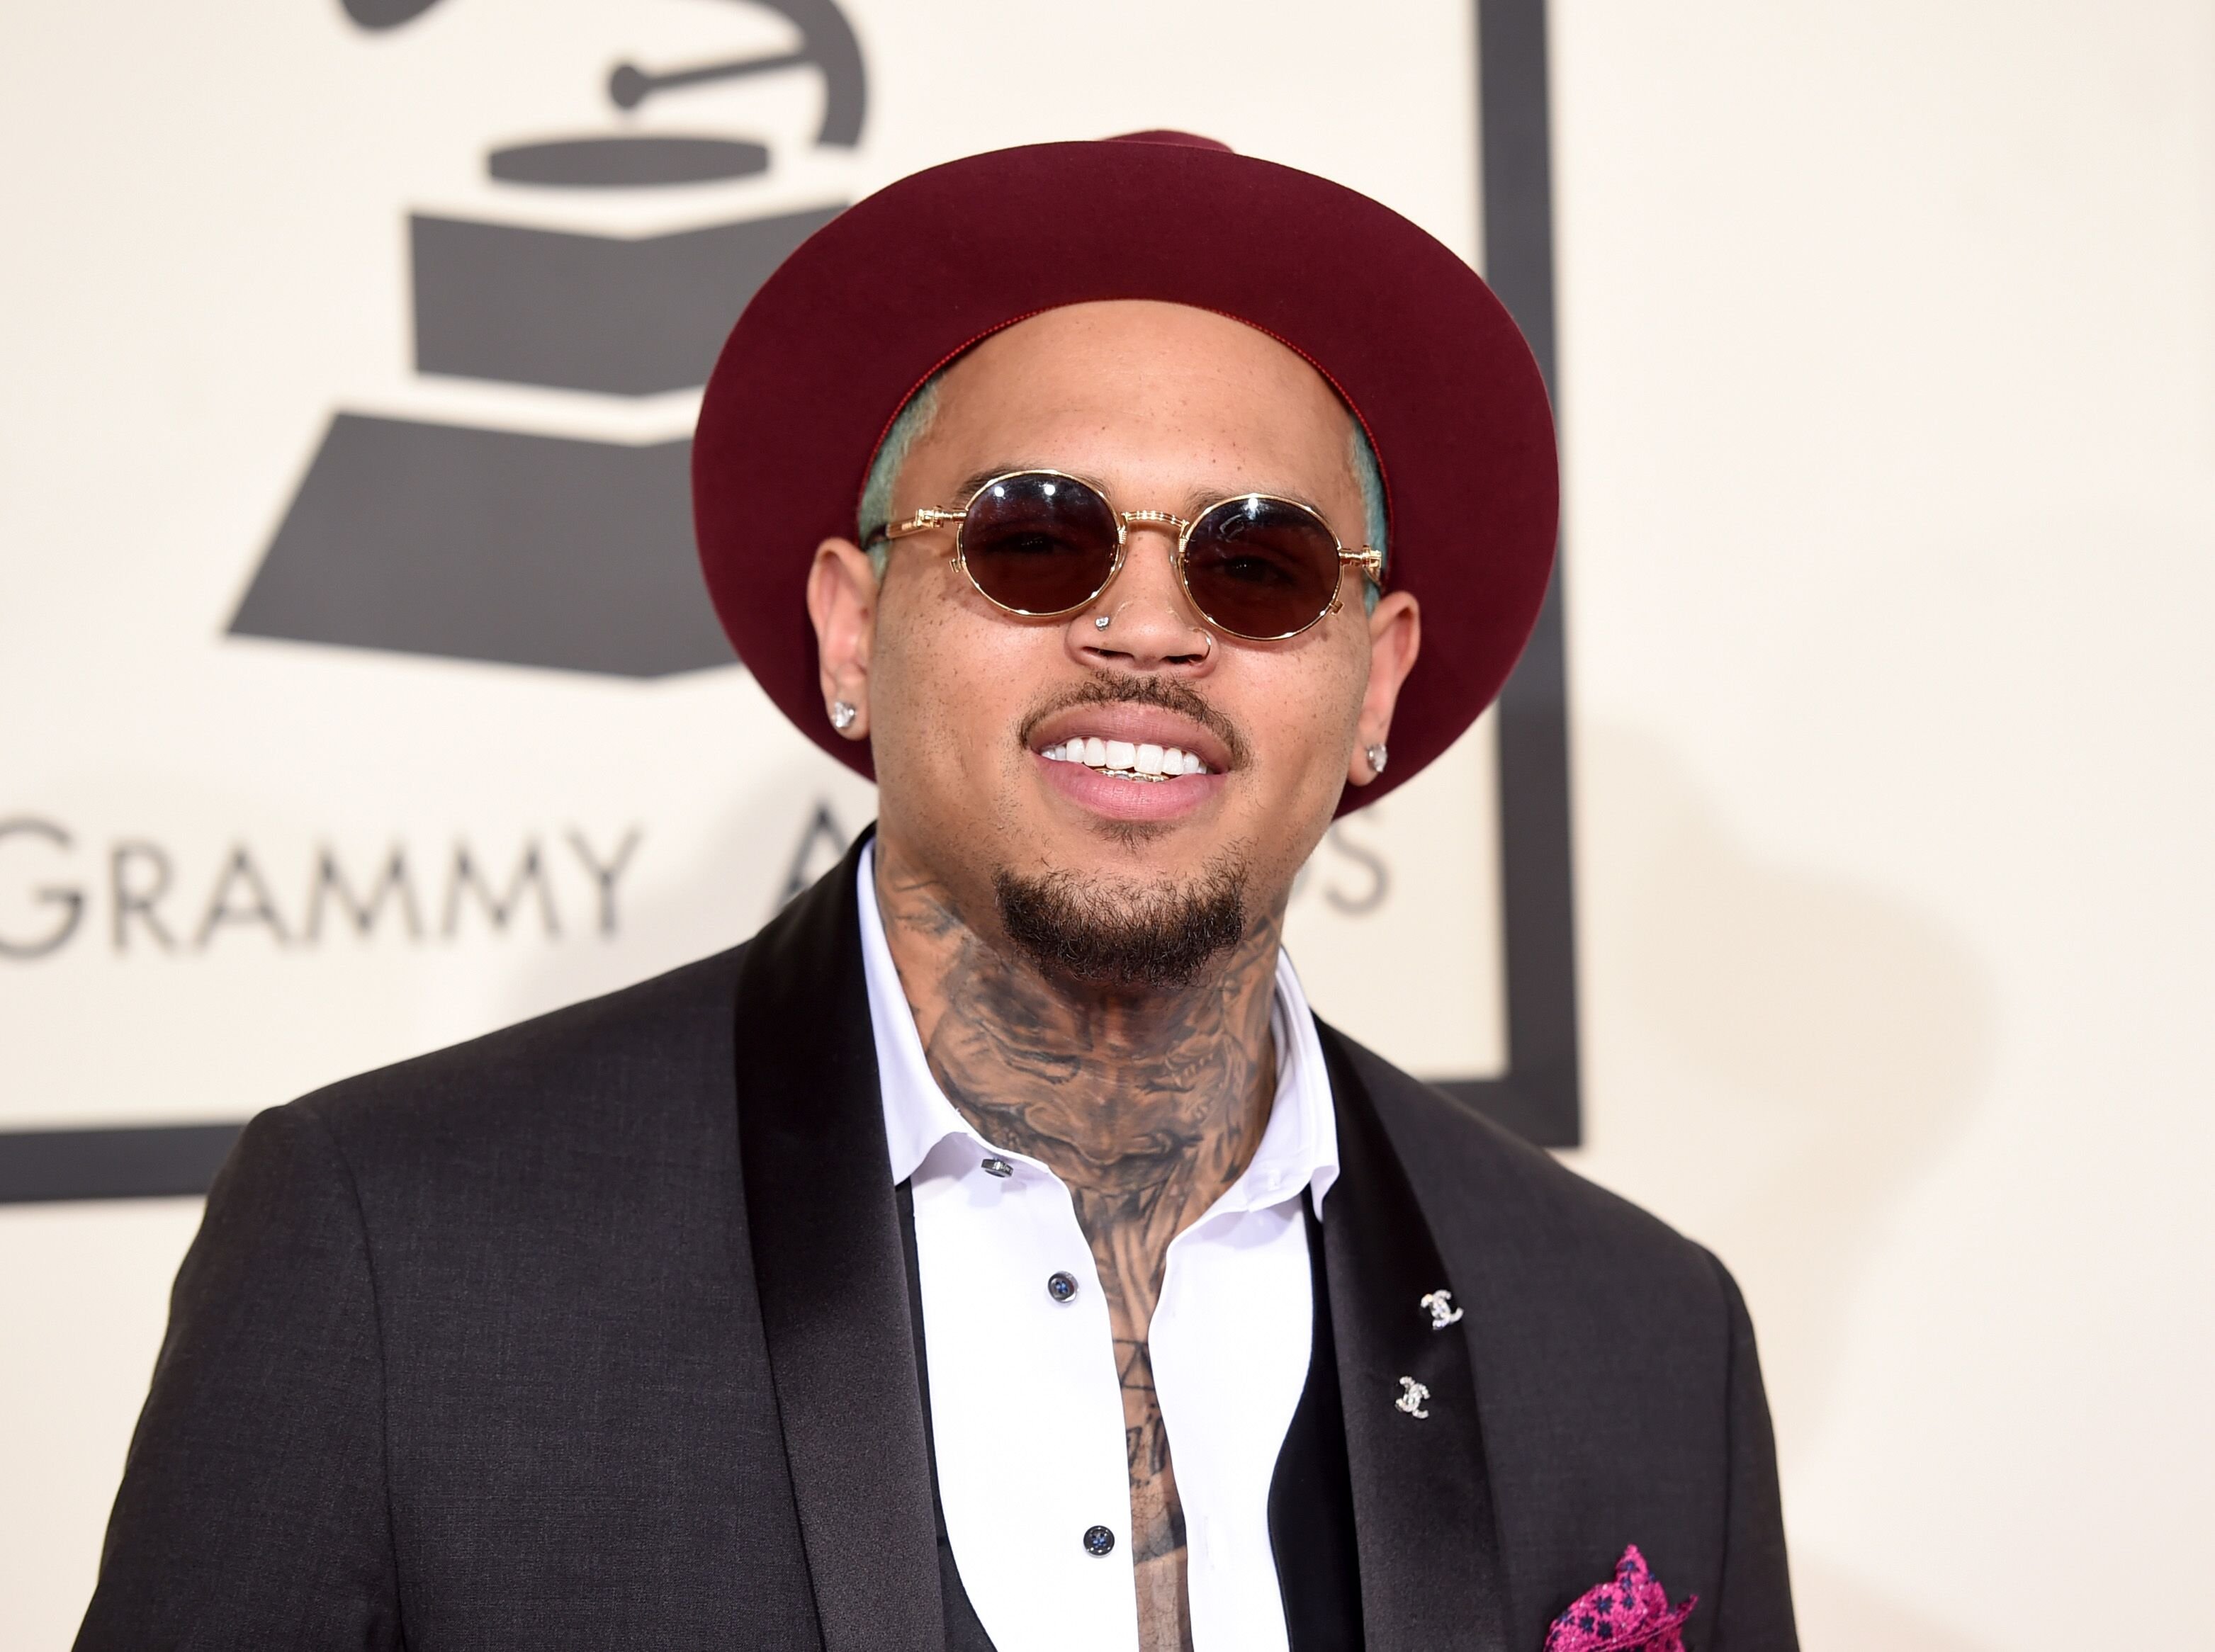 Singer Chris Brown at the Grammy Awards | Source: Getty Images